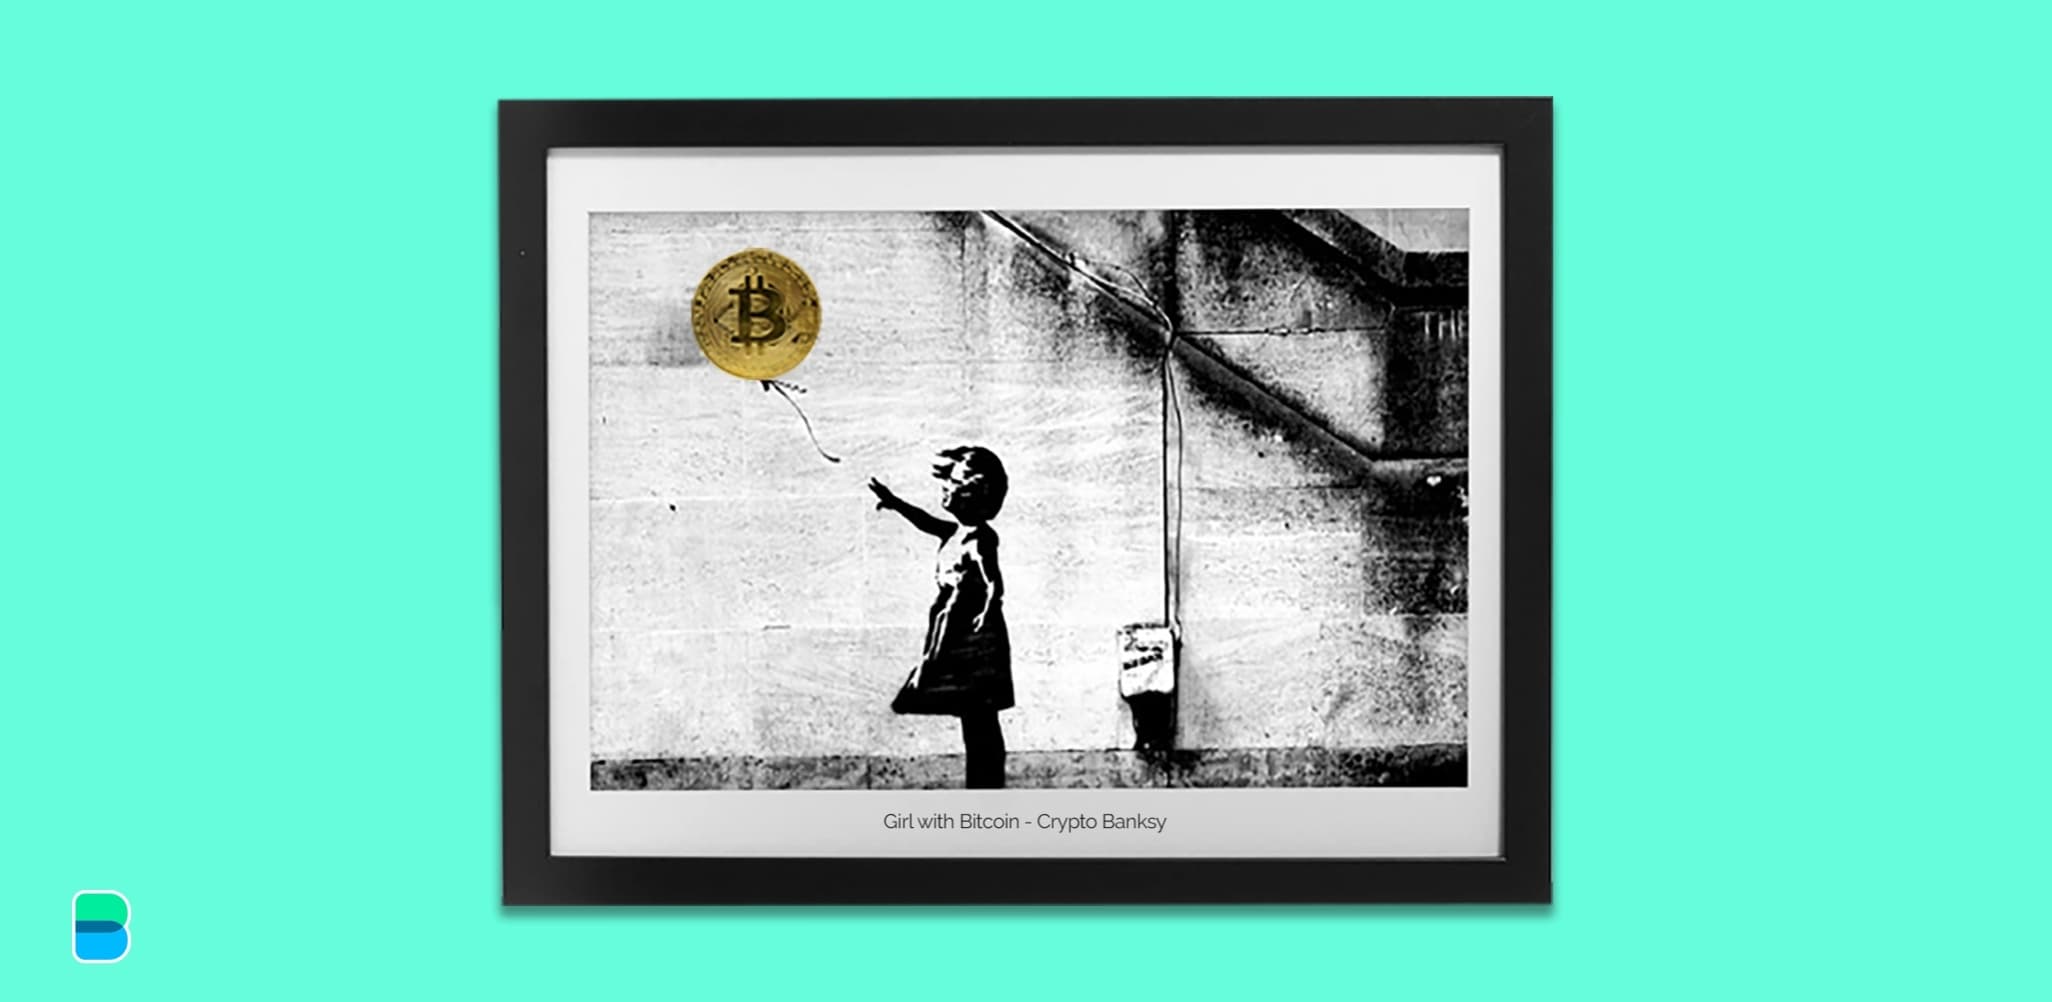 Have some spare bitcoin? Buy a Banksy